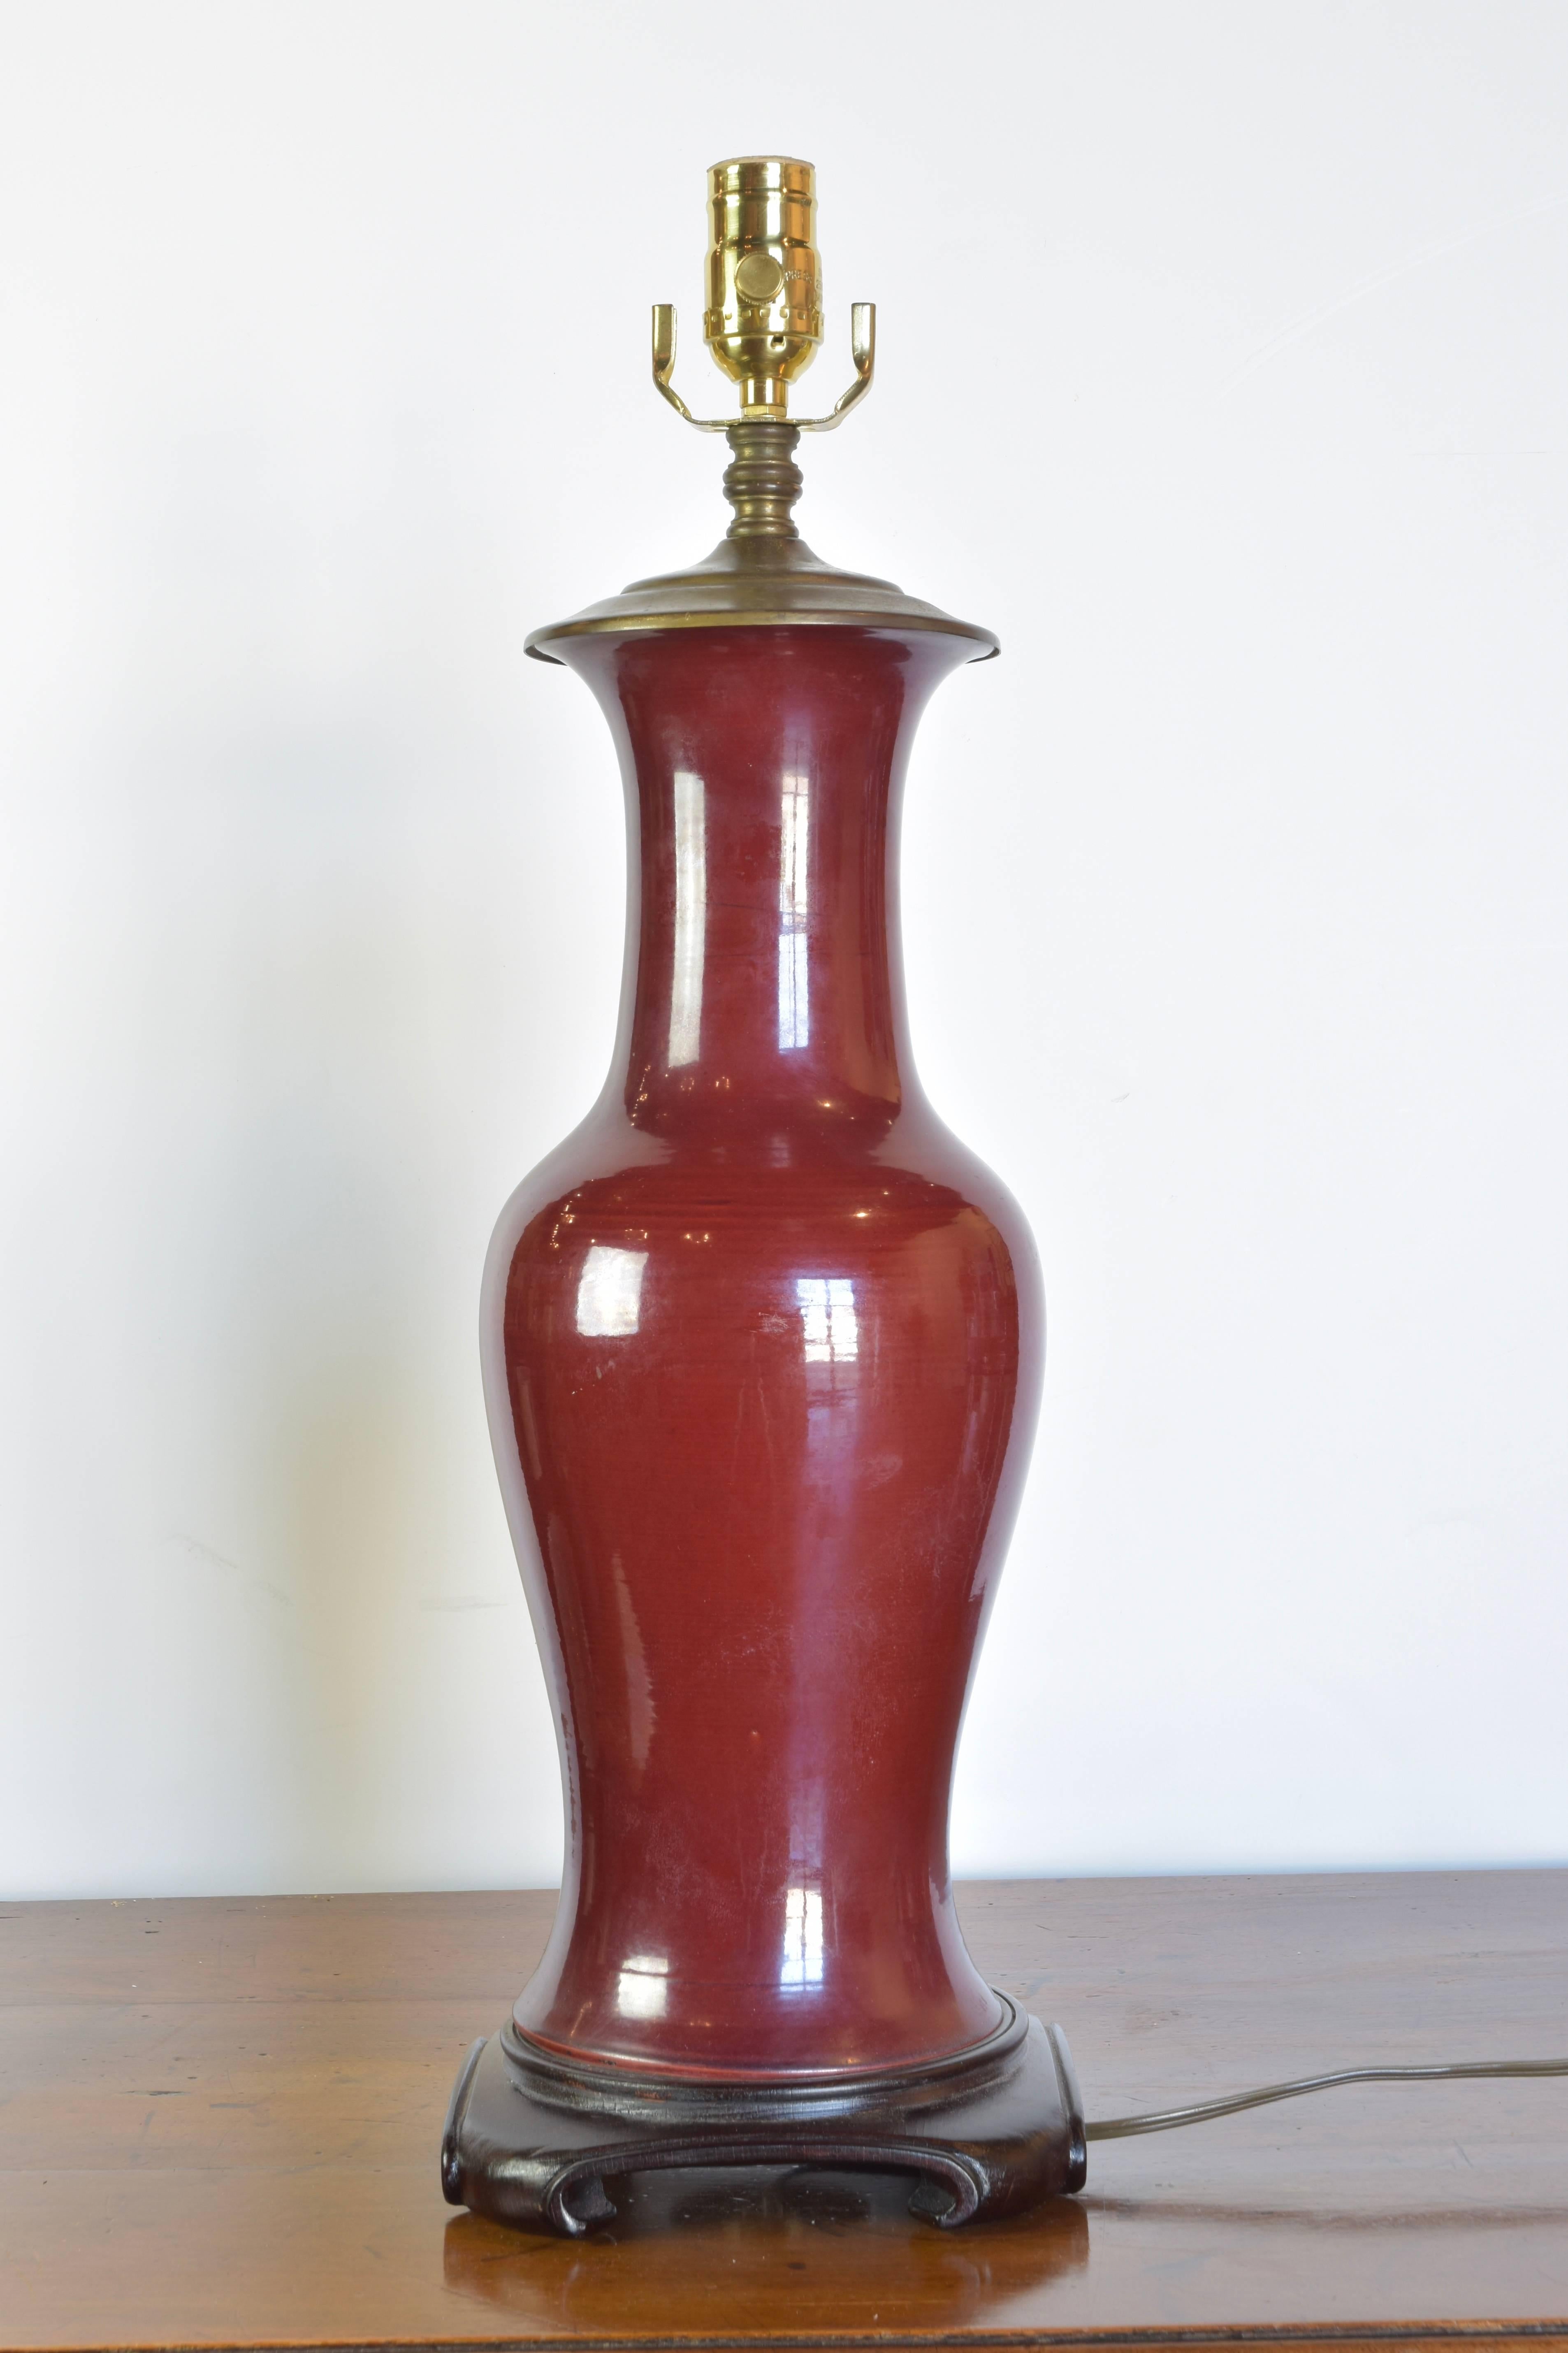 Stunning pair of 19th century Oxblood vases wired as lamps in the mid-20th century. There is slight variation in the height of this pair.

Lamps measure 29